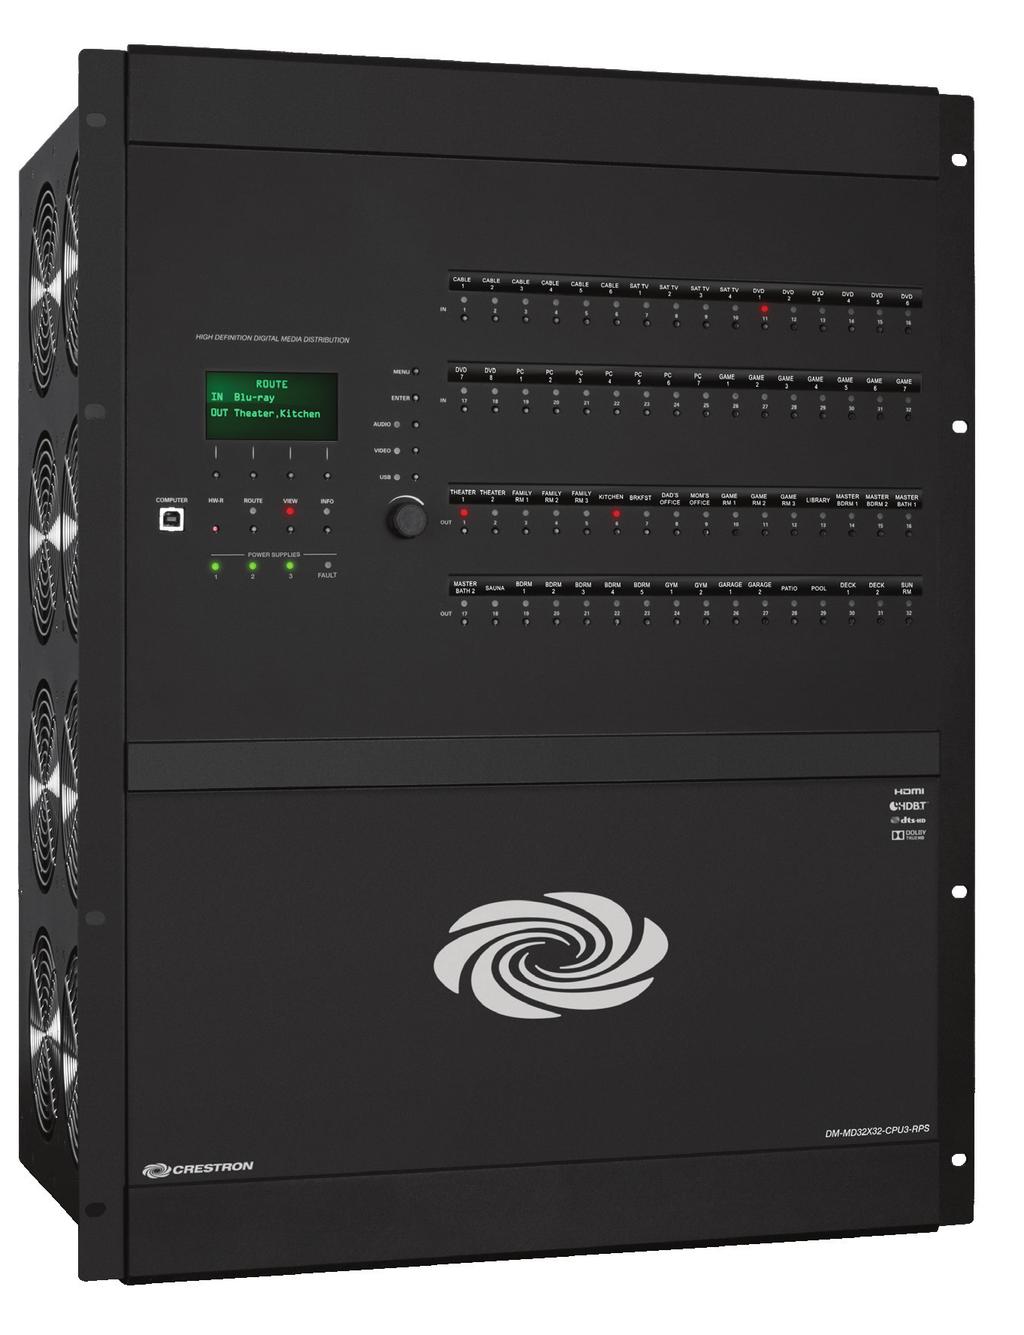 > > Delivers a unified HD signal distribution solution incorporating QuickSwitch HD technology manages HDCP keys for fast, reliable switching > > Provides lossless HD AV signal routing over twisted